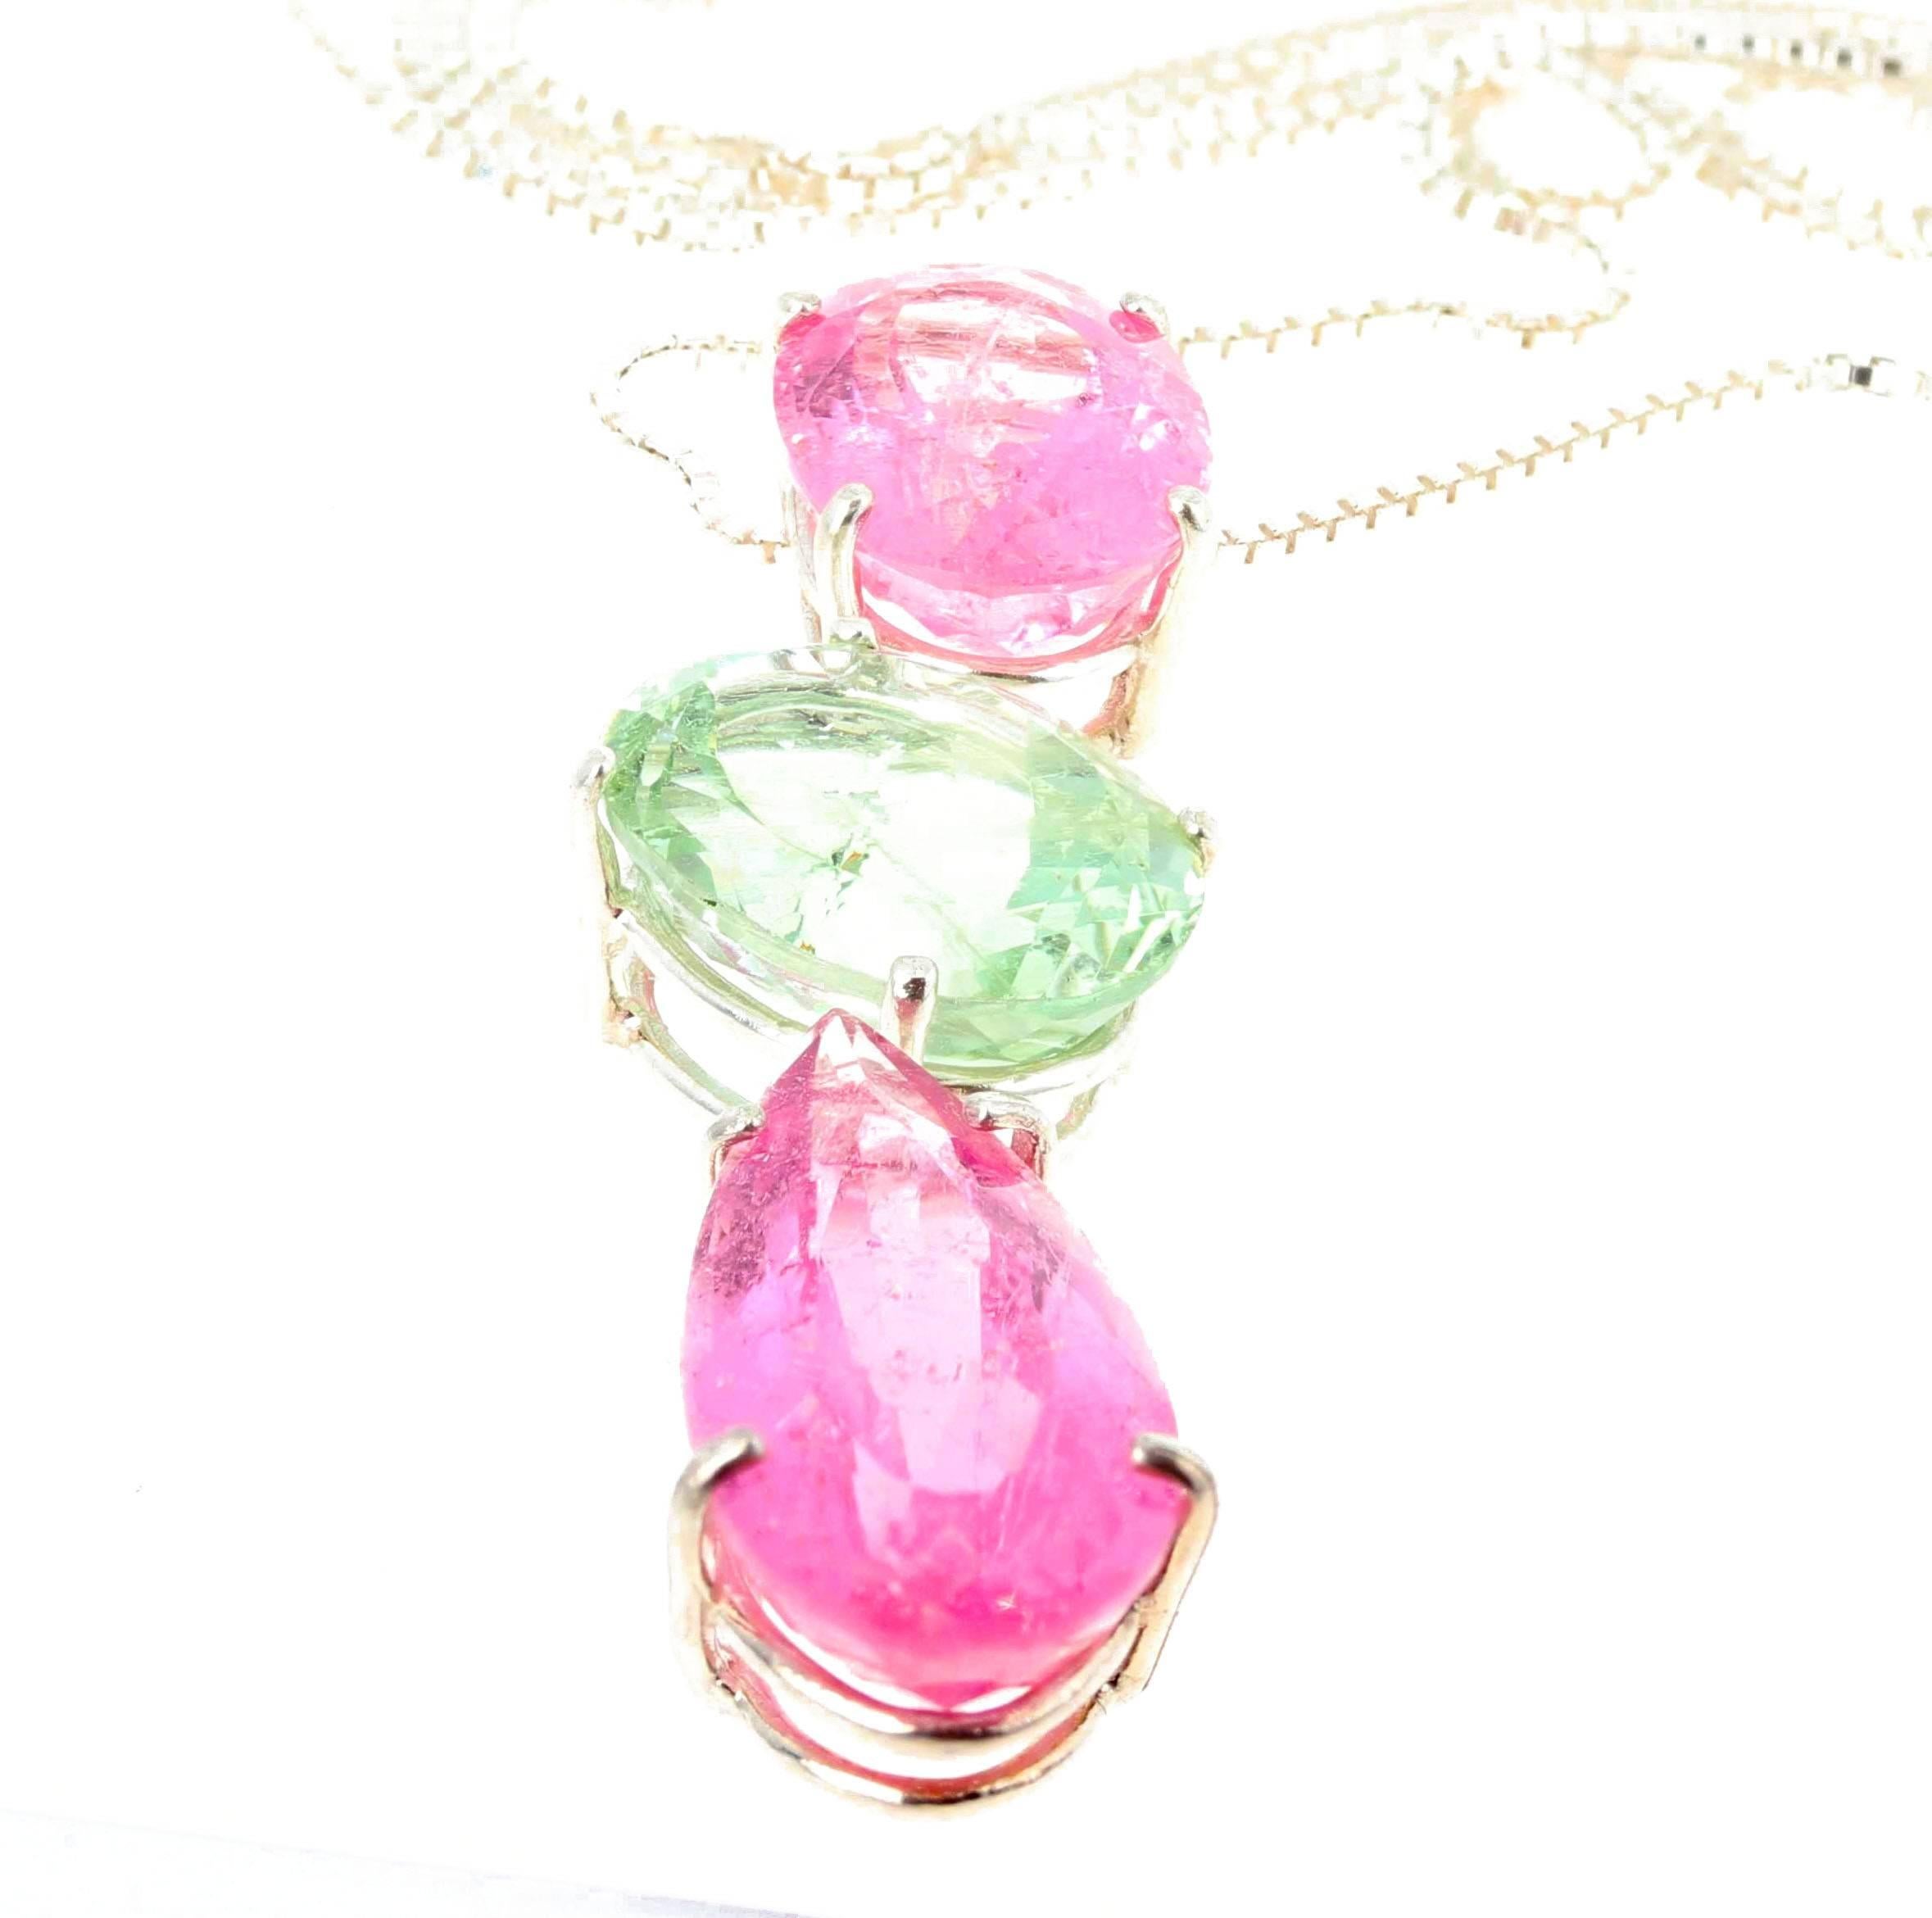 22 carats of light pink and light green Tourmaline swing elegantly set in a three part sterling silver pendant.  (top pink 12.9 mm x 10 mm - green 14/4 mm x 10.7 mm - lower pink 20 mm x 10.1 mm).  Spectacular optical effect in the Tourmalines